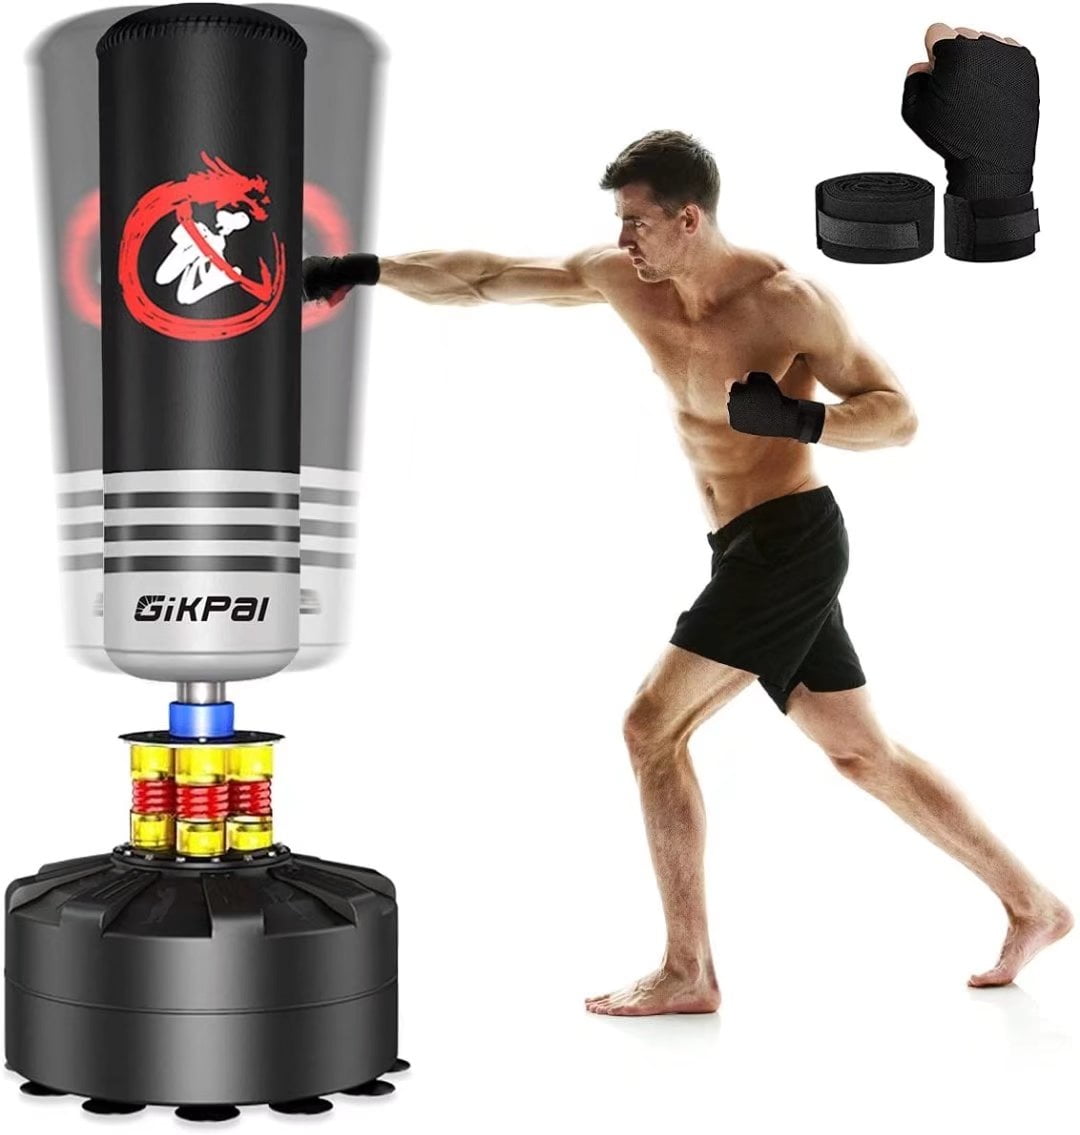 175cm Free Standing Boxing Punch Bag Heavy Heavy Duty Gym Training Martial Arts 